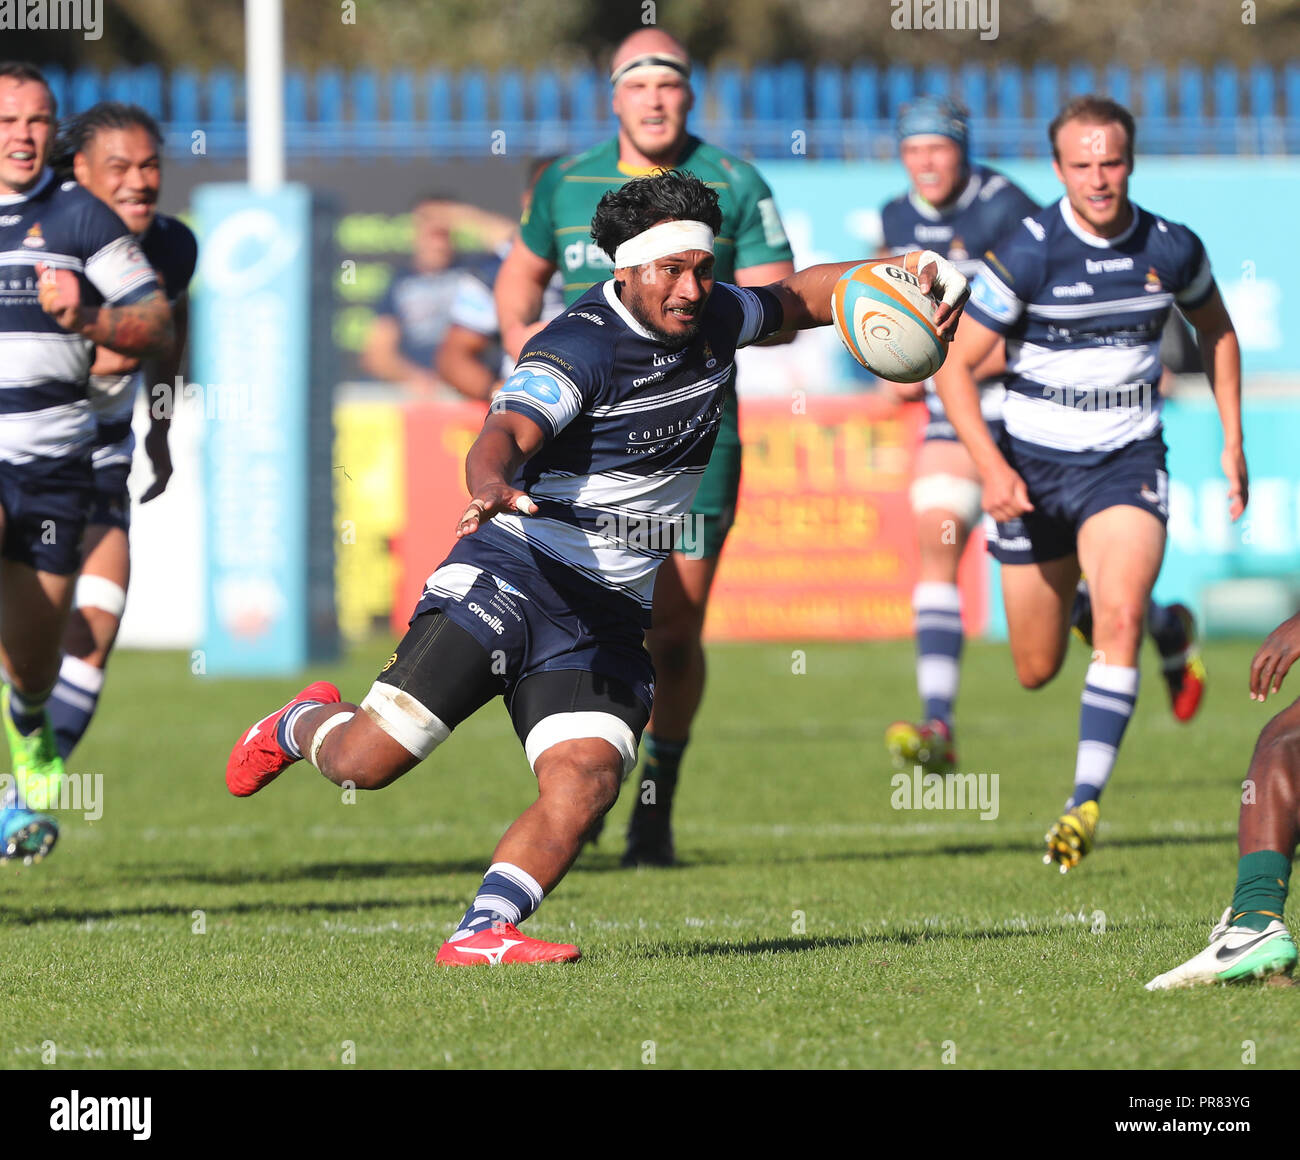 Coventry, UK. 29th Sept 2018. Rugby Union.    Jack Ram on the charge for Coventry during the Greene King Championship match played between Coventry and London Irish rfc at the Butts Park Arena, Coventry.  © Phil Hutchinson/Alamy Live News Stock Photo